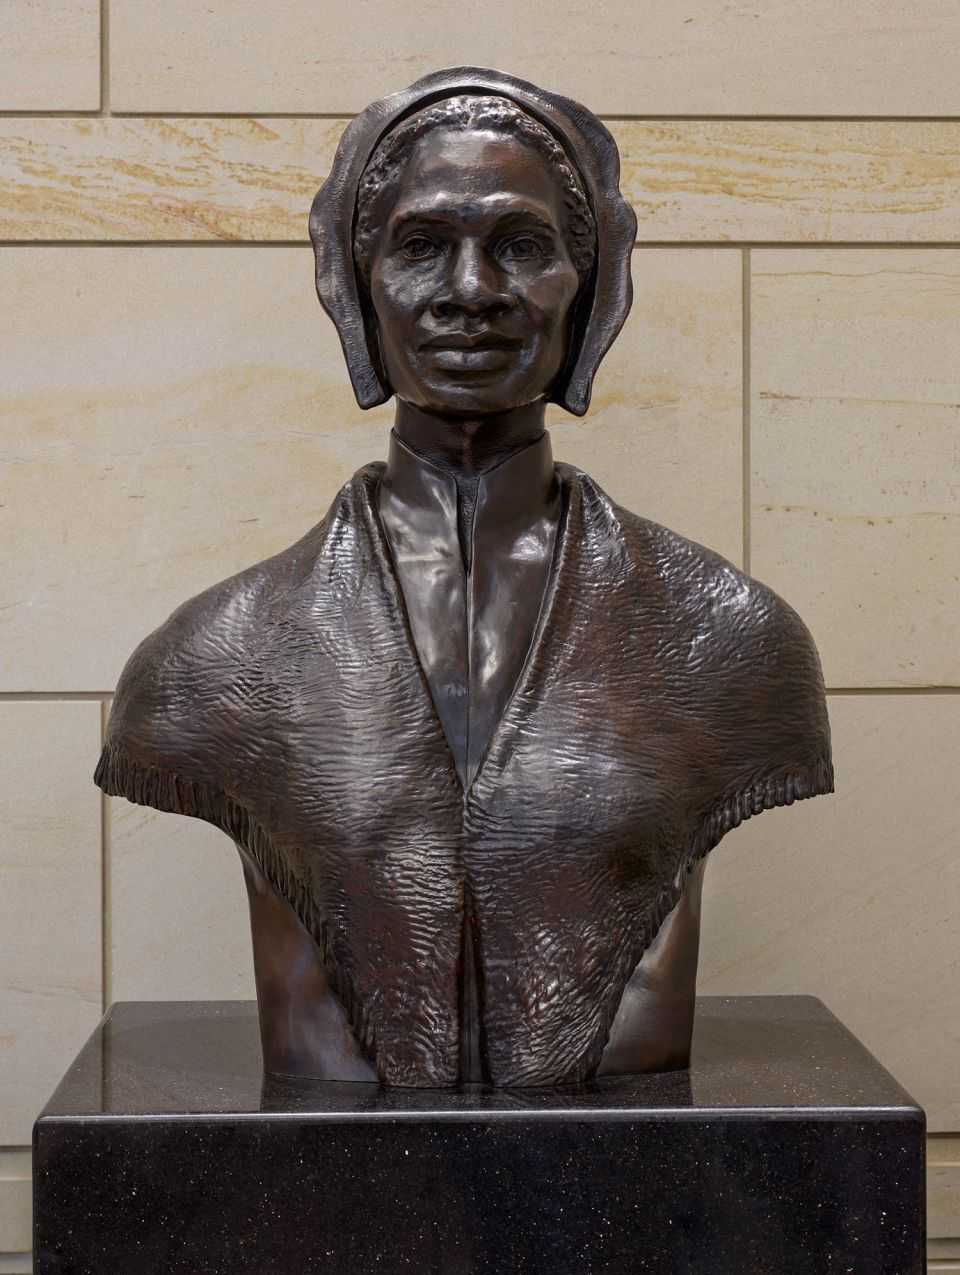 Photograph of Sojourner Truth Bust in the U.S. Capitol